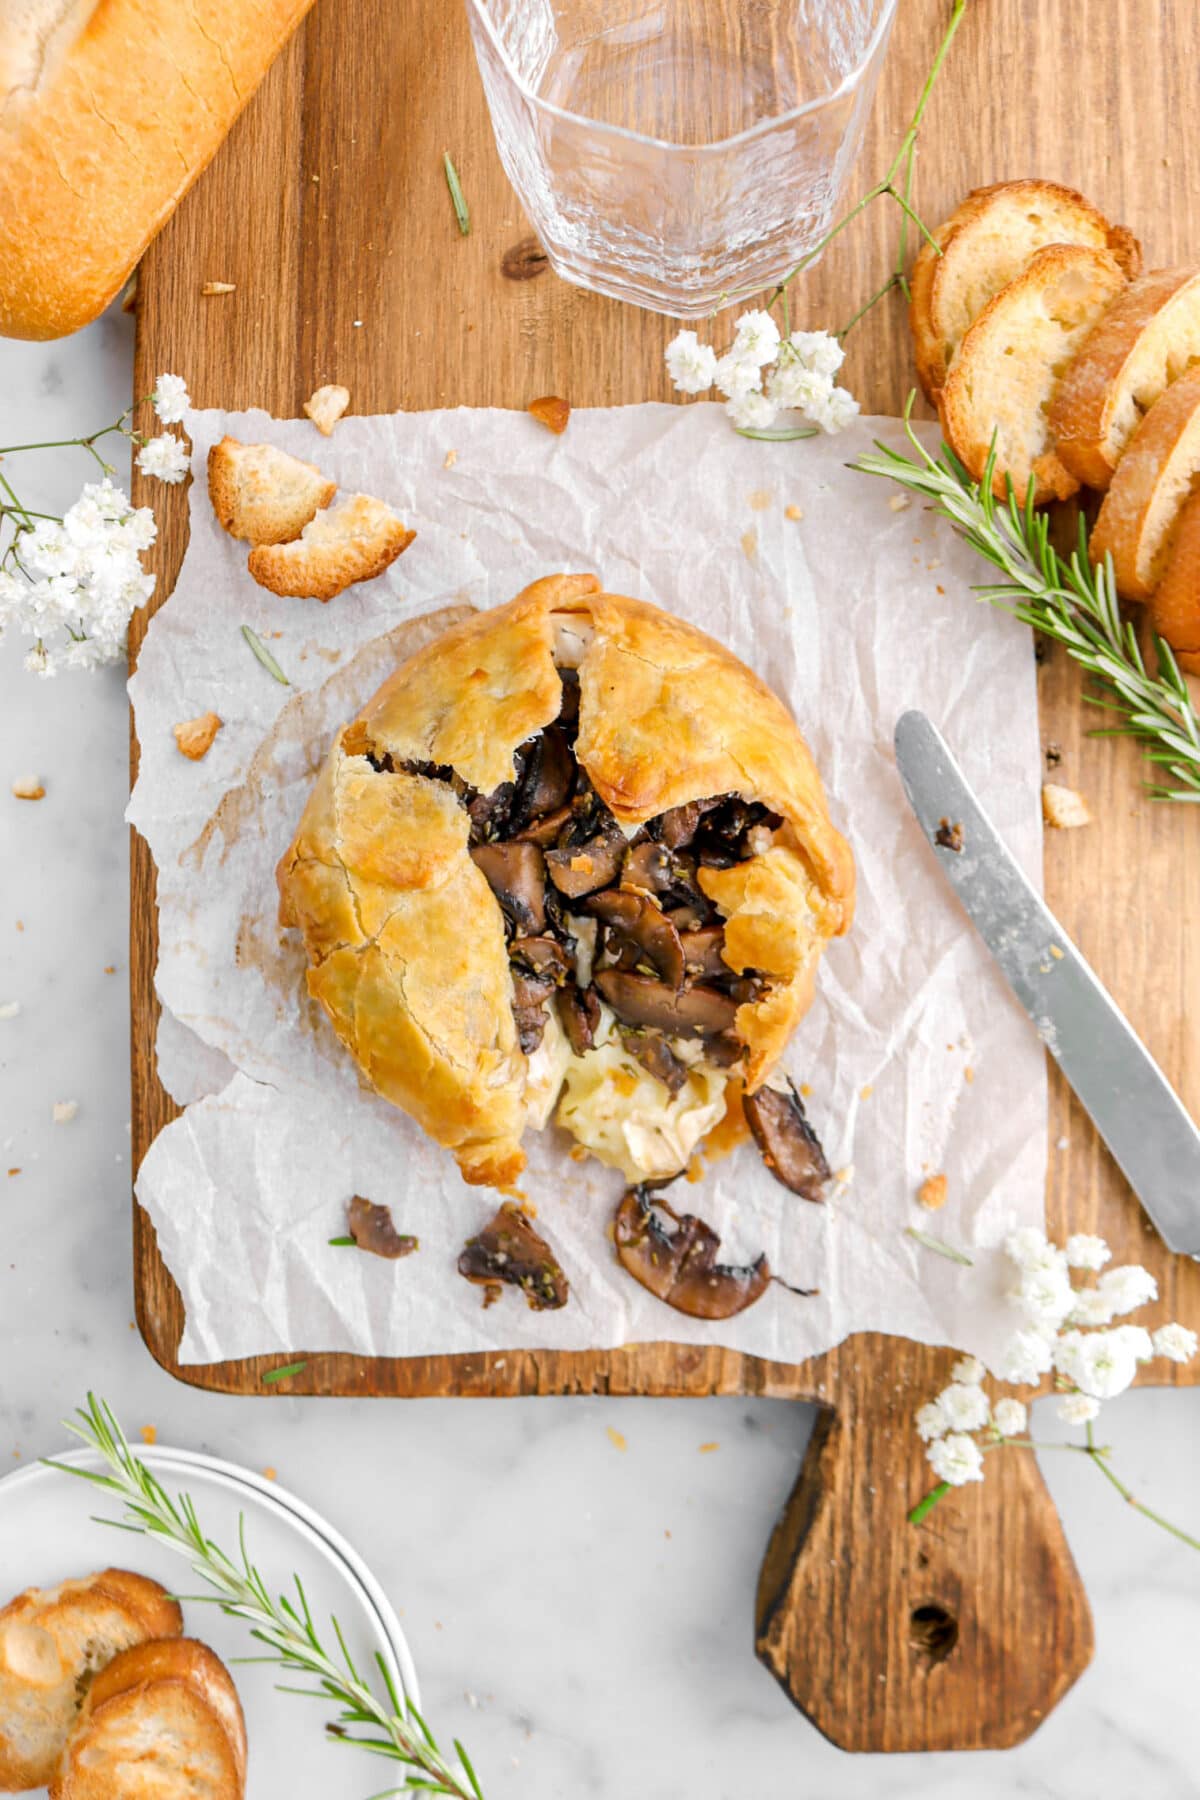 overhead shot of baked brie wrapped in puff pastry with mushrooms spilling out on square piece of parchment paper with flowers, rosemary sprigs, and toasted bread slices beside.